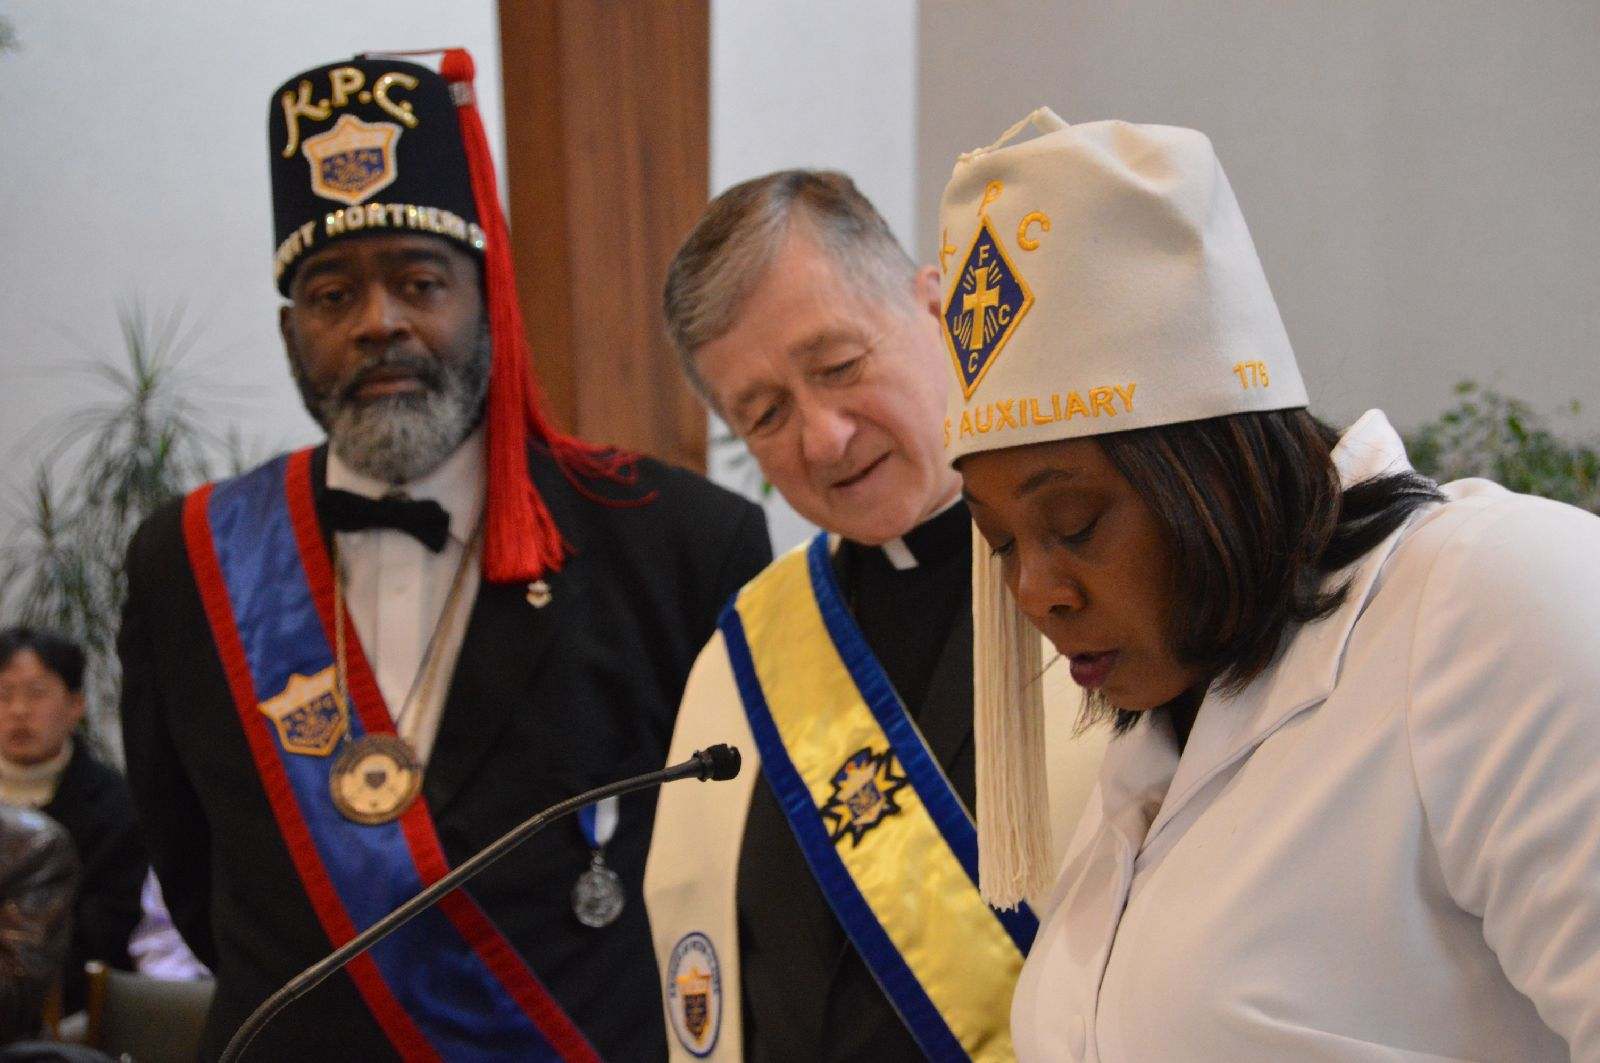 Caridnal Cupich speaking with Knights of Peter Claver